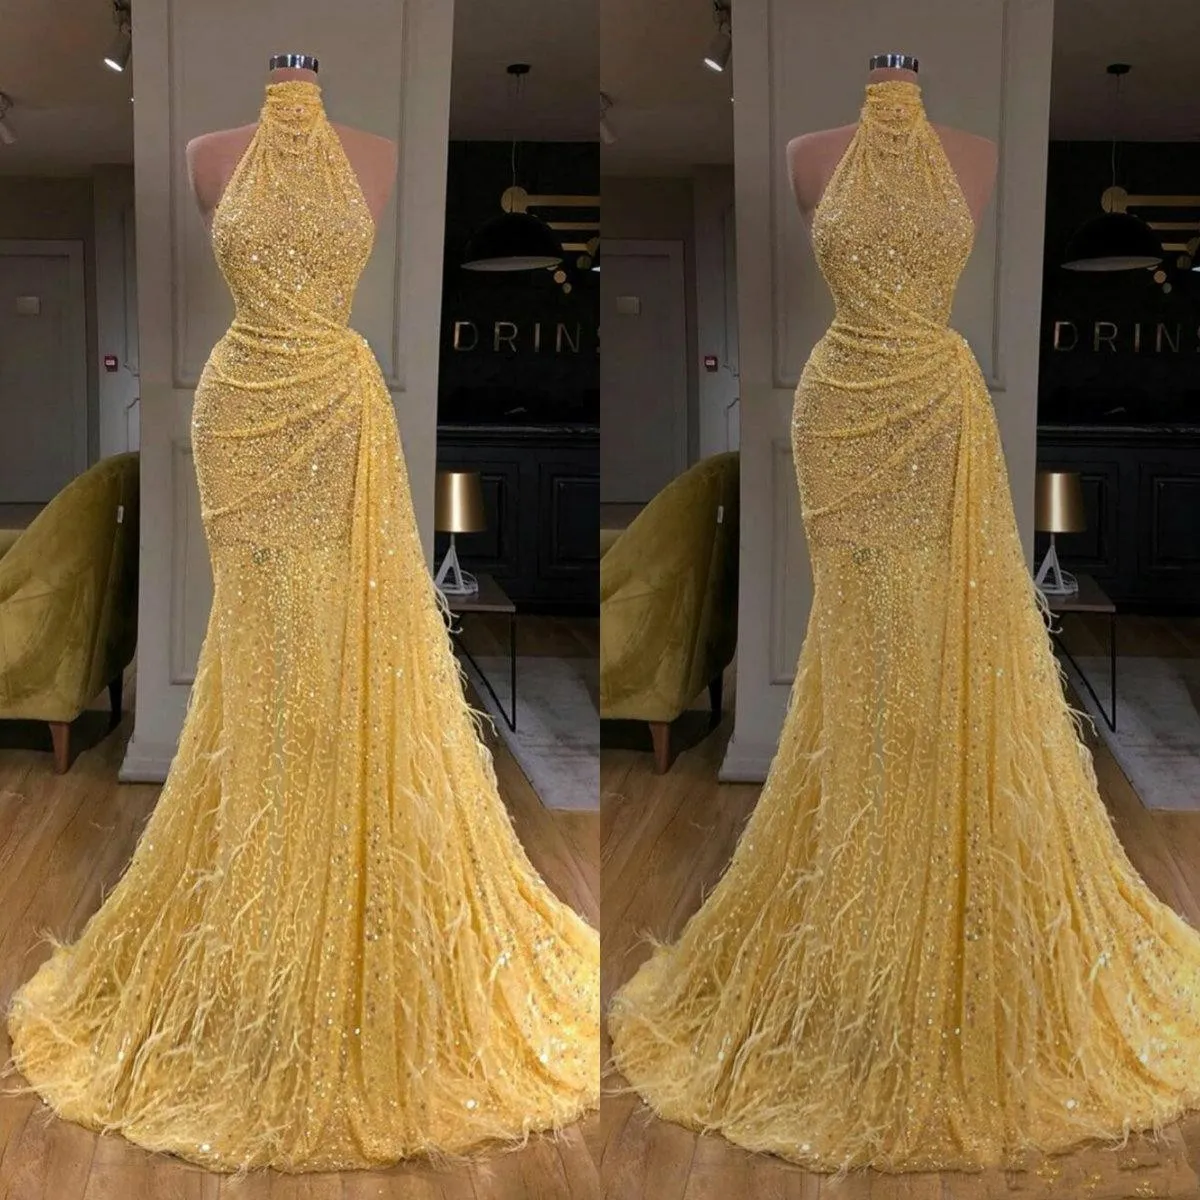 2021 Glitter New Bling Mermaid Evening Dresses Sexy Feather High Neck Sleeveless Yellow Sequins Sequined Lace Formal Party Dress Prom Gowns